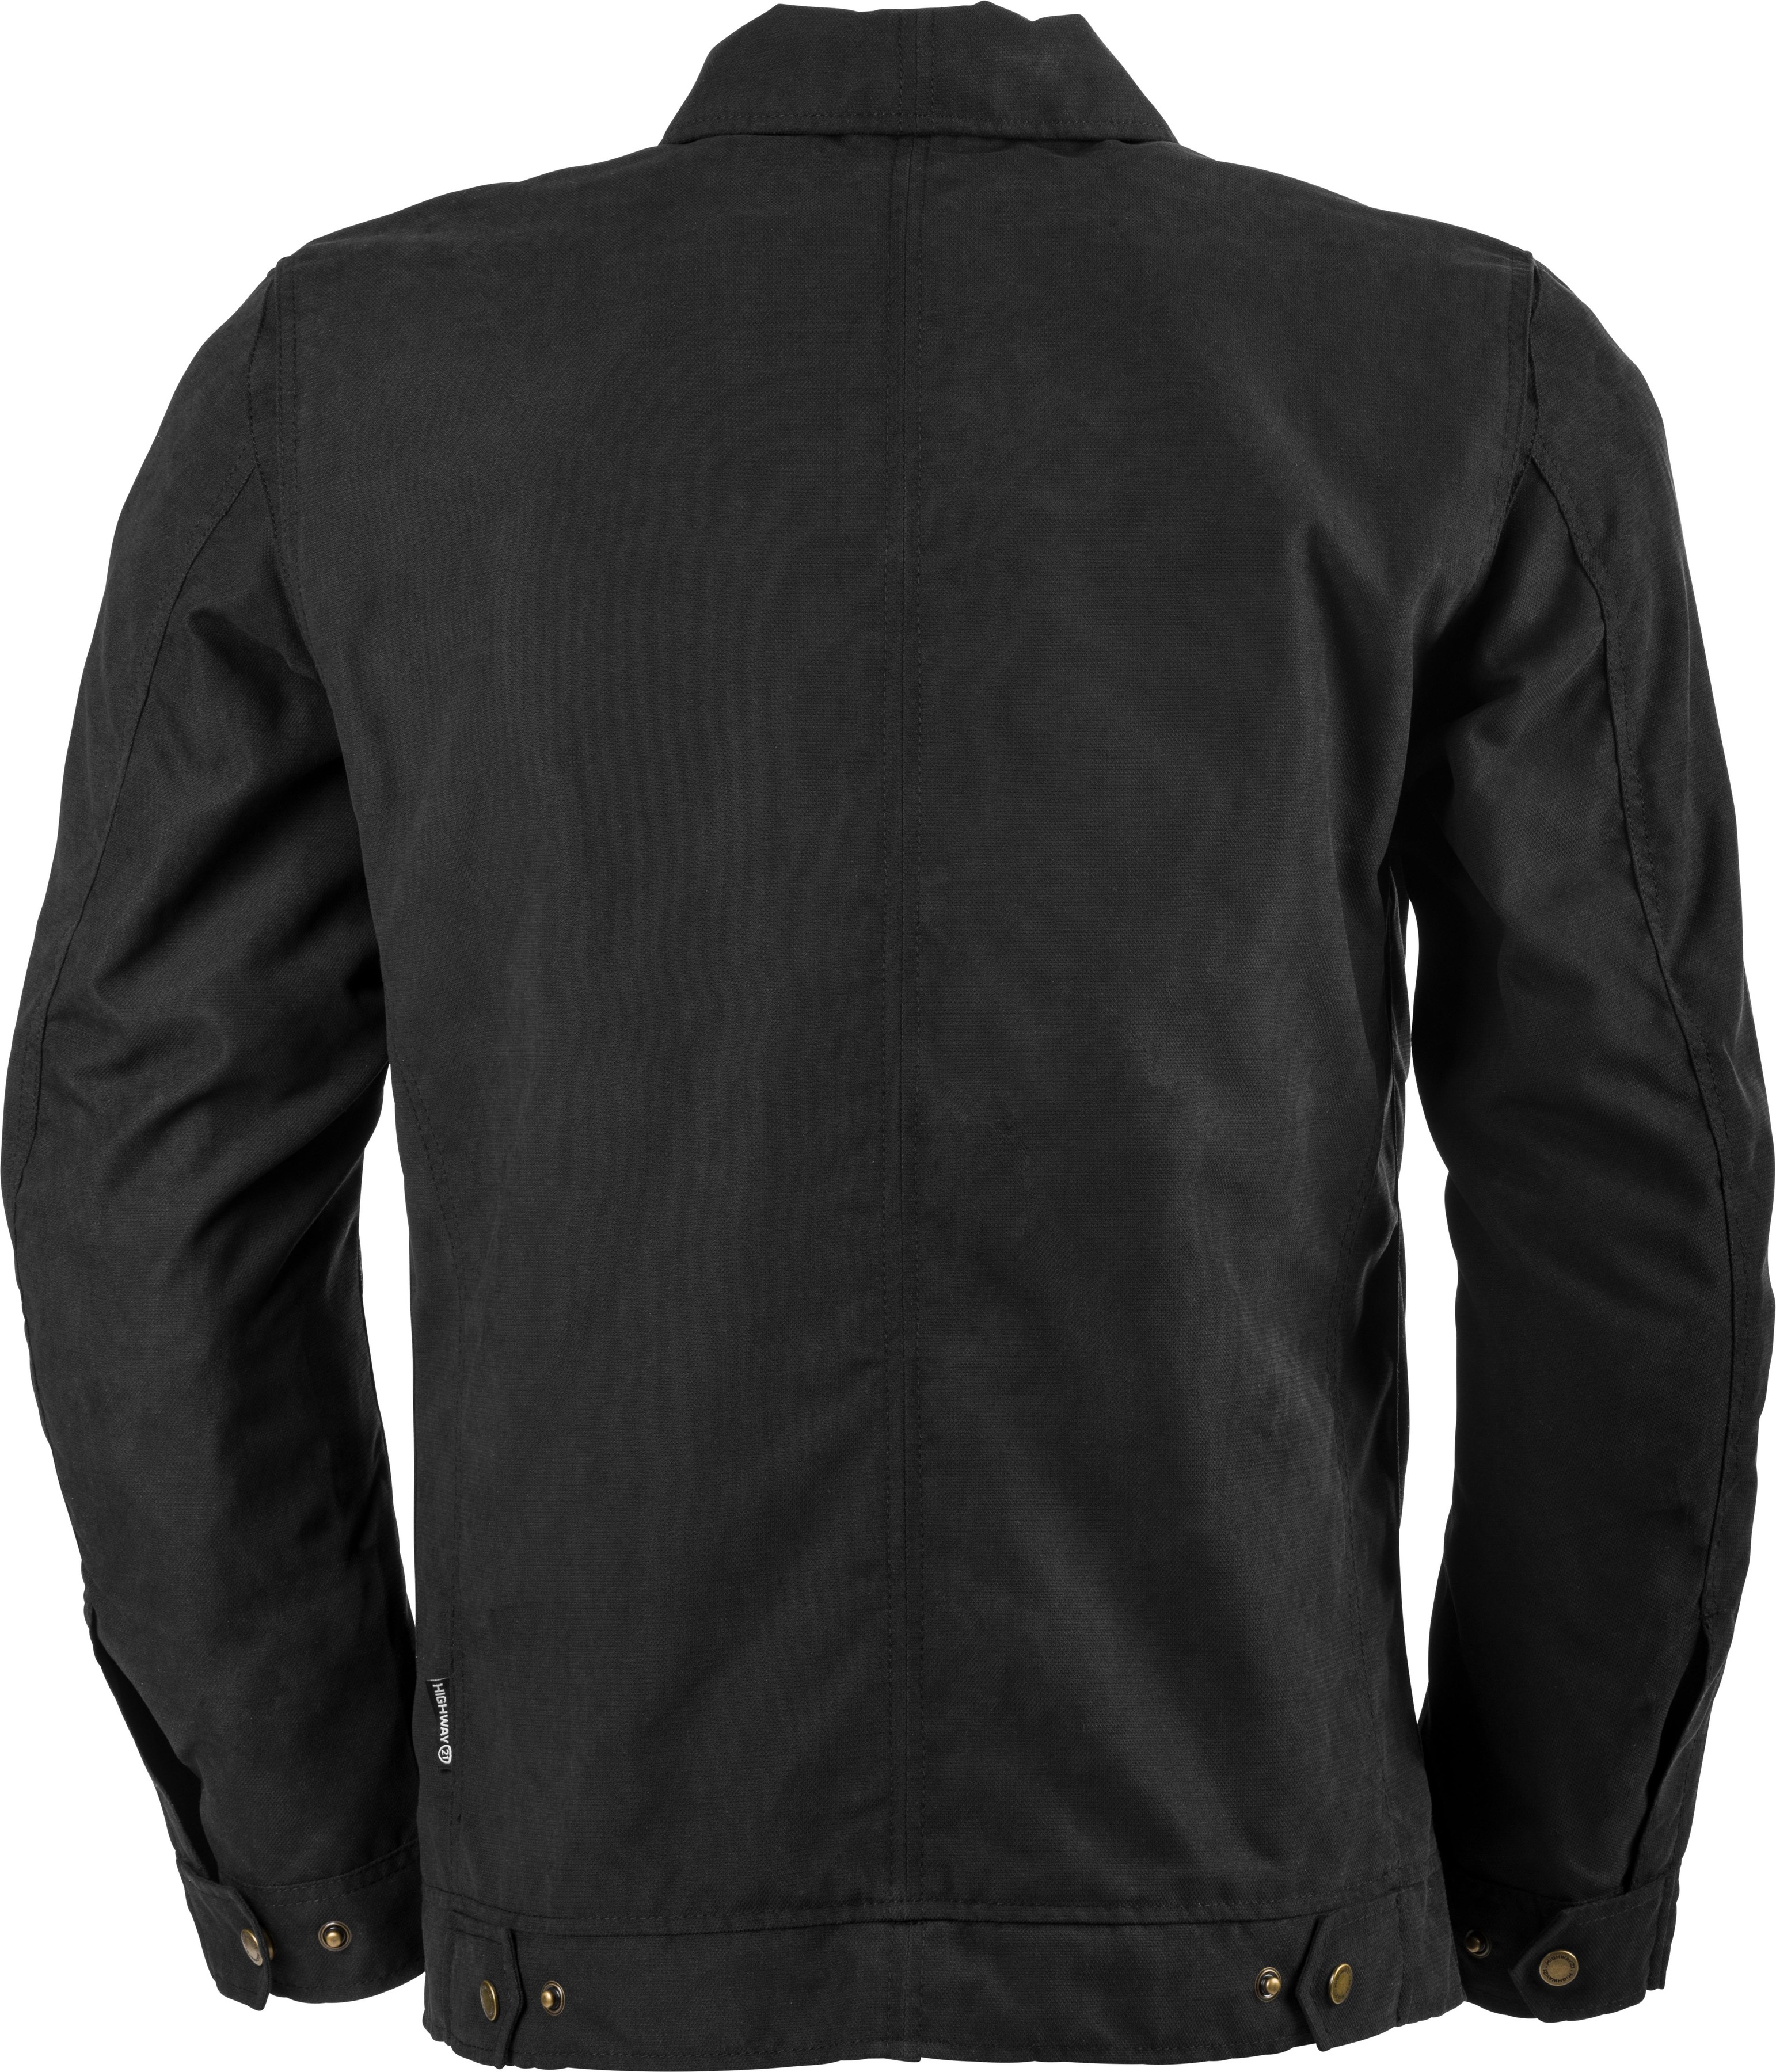 Winchester Riding Jacket Black Large - Click Image to Close